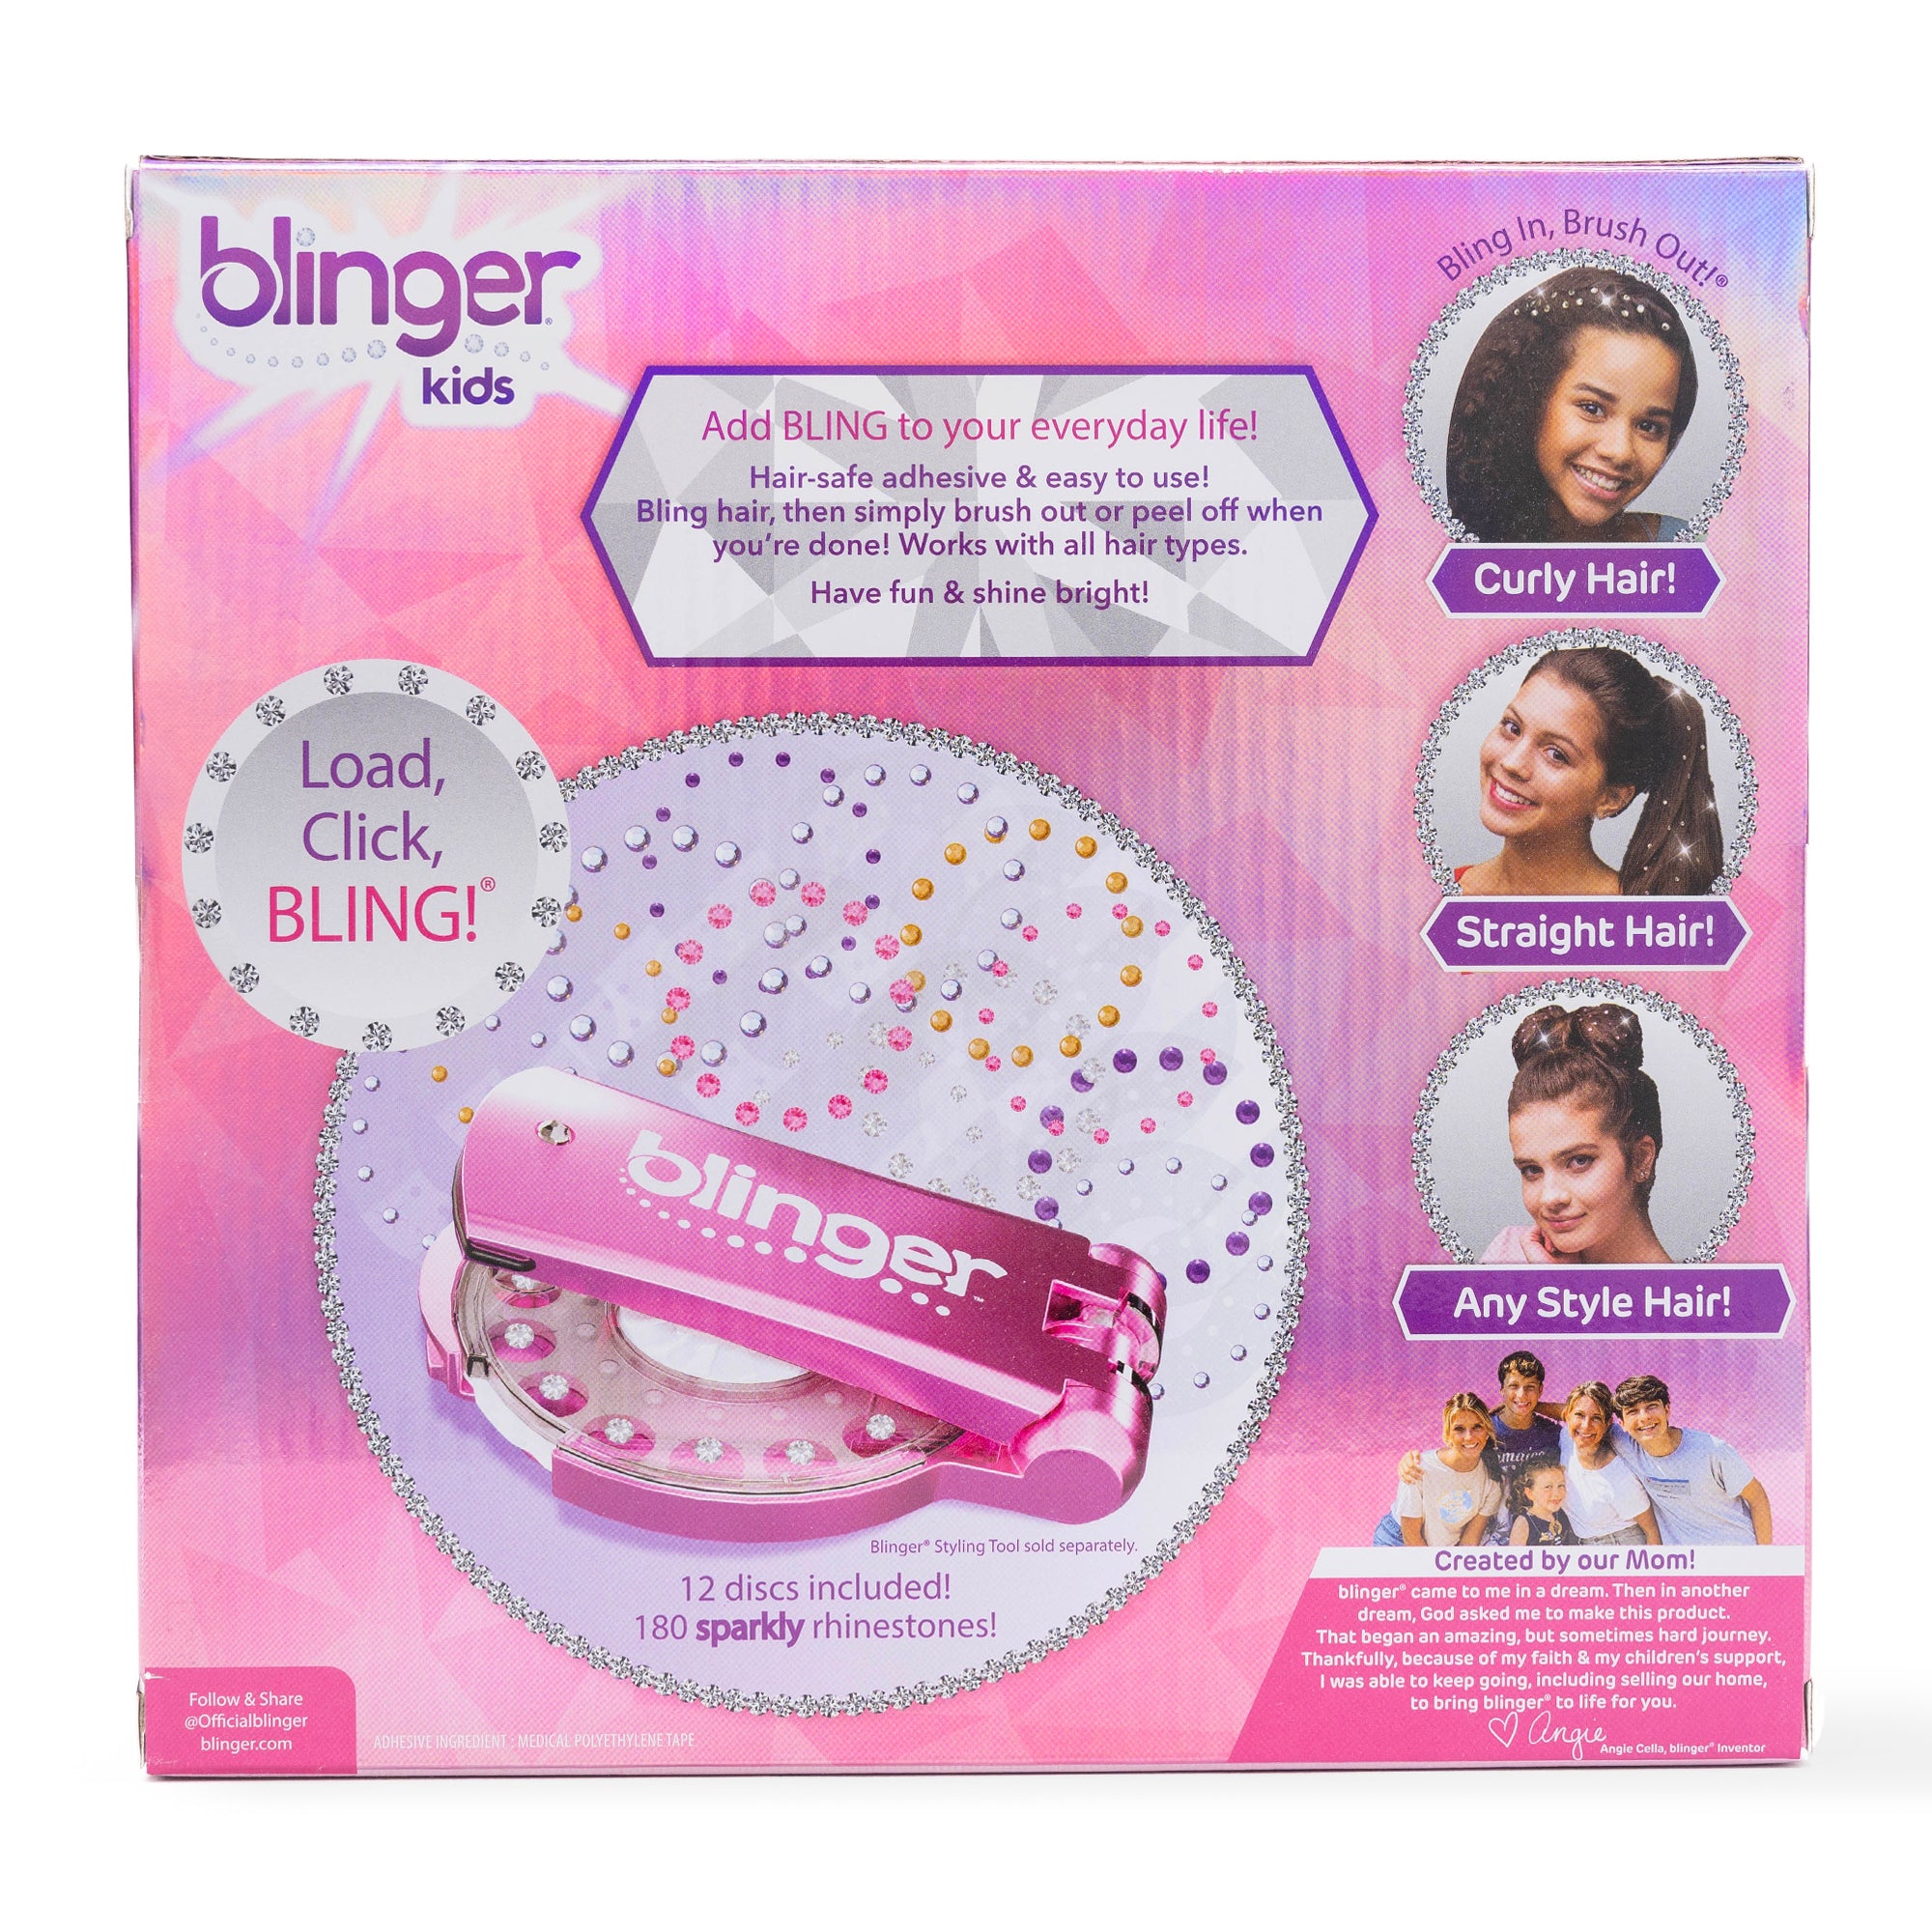 Blinger Glimmer Refill Pack, 5 Discs - 75 Precision-Cut Glass Crystals, Bedazzling Hair Gems, Hair-Safe Adhesive â€“ Bling In Brush Out